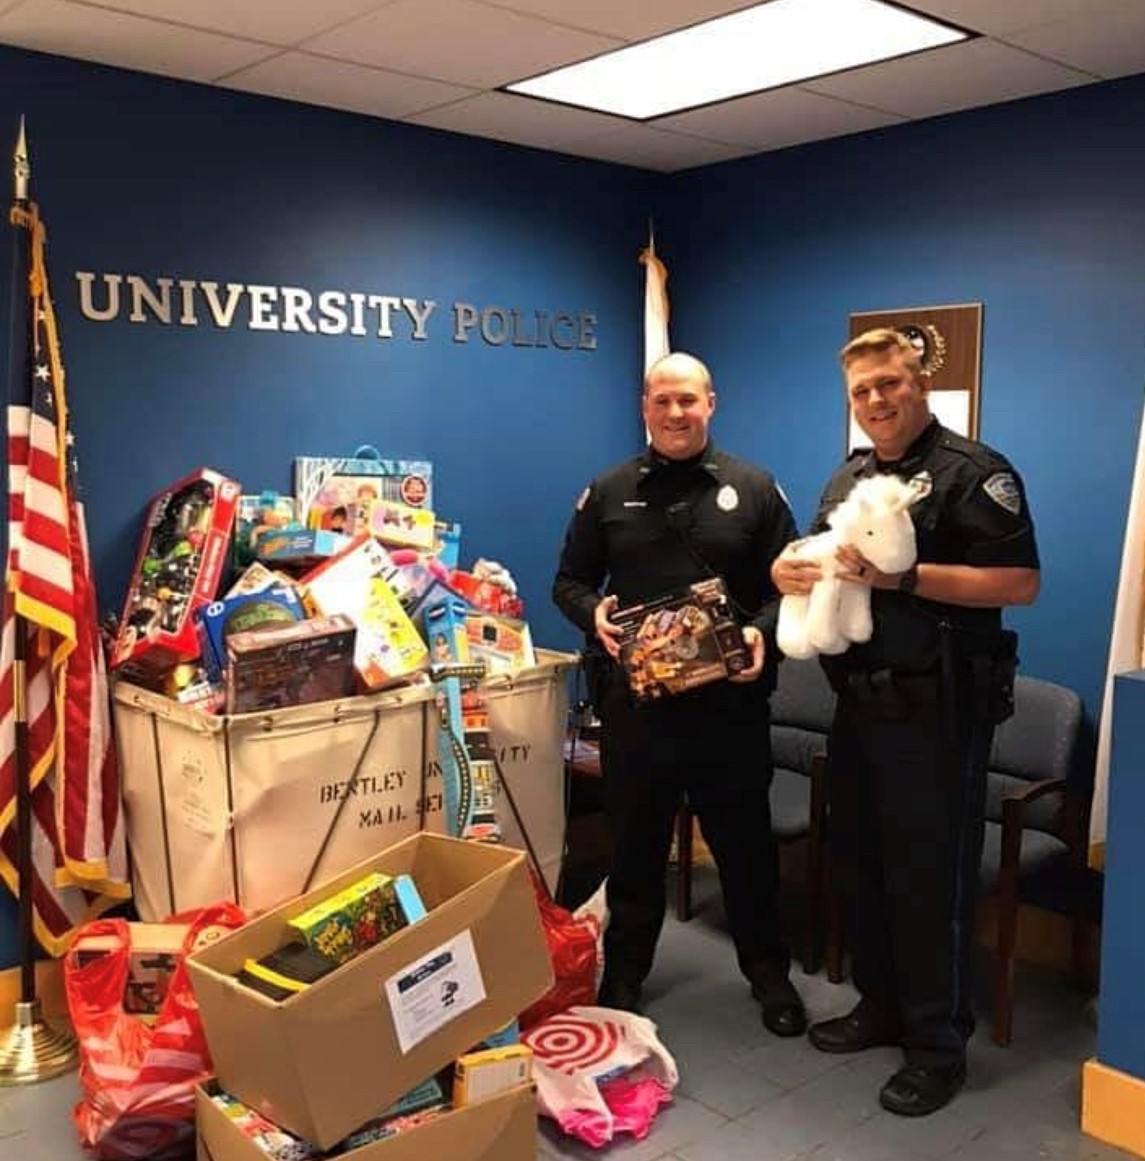 University police collecting toy donations